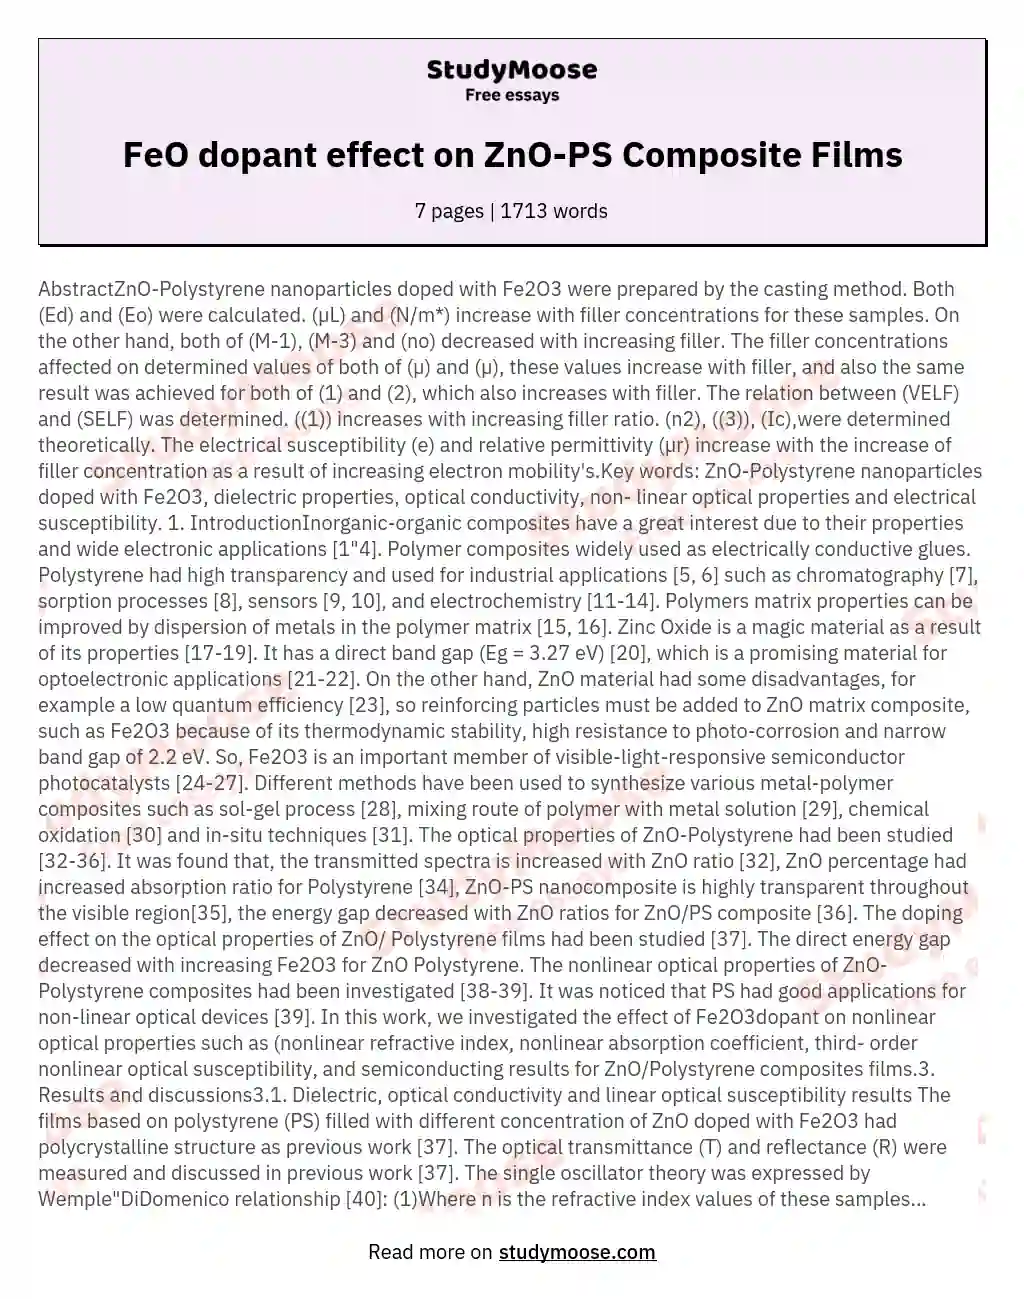 FeO dopant effect on ZnO-PS Composite Films essay